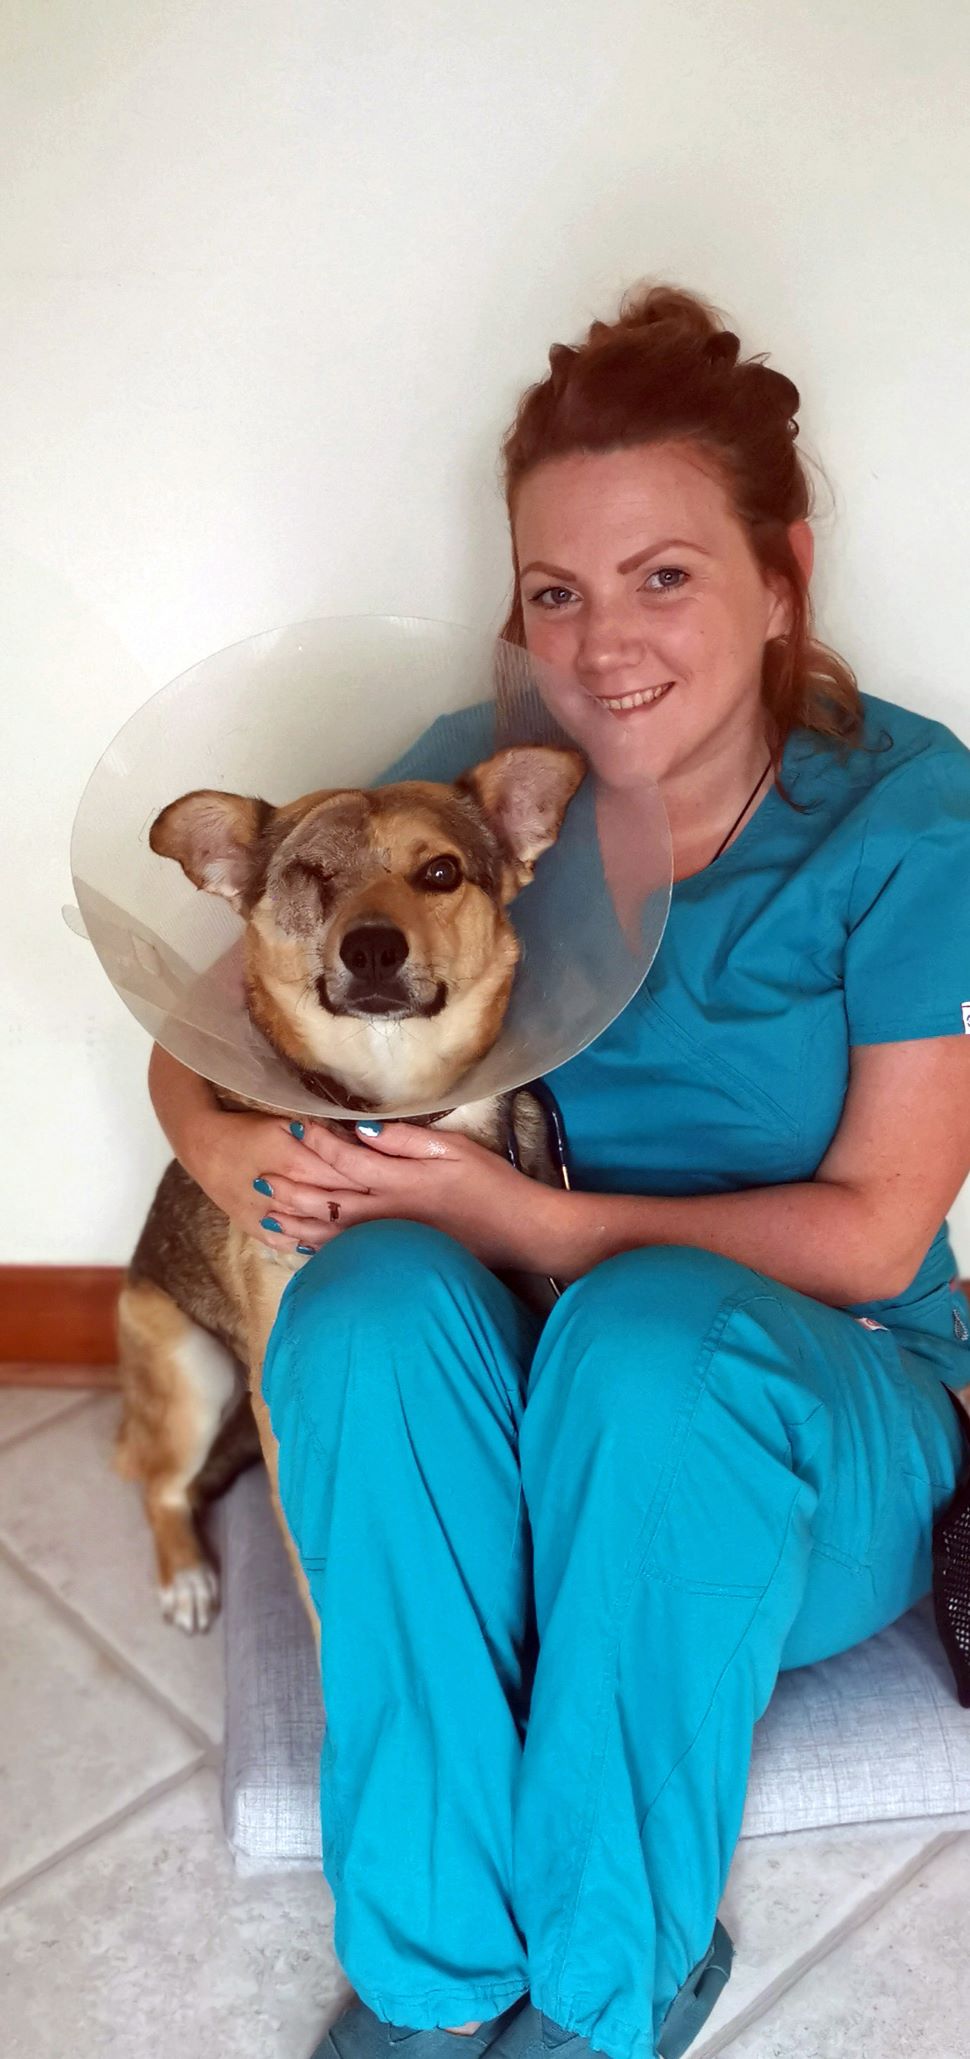 Vet nurse’s dream to complete bucket list after terminal cancer diagnosis